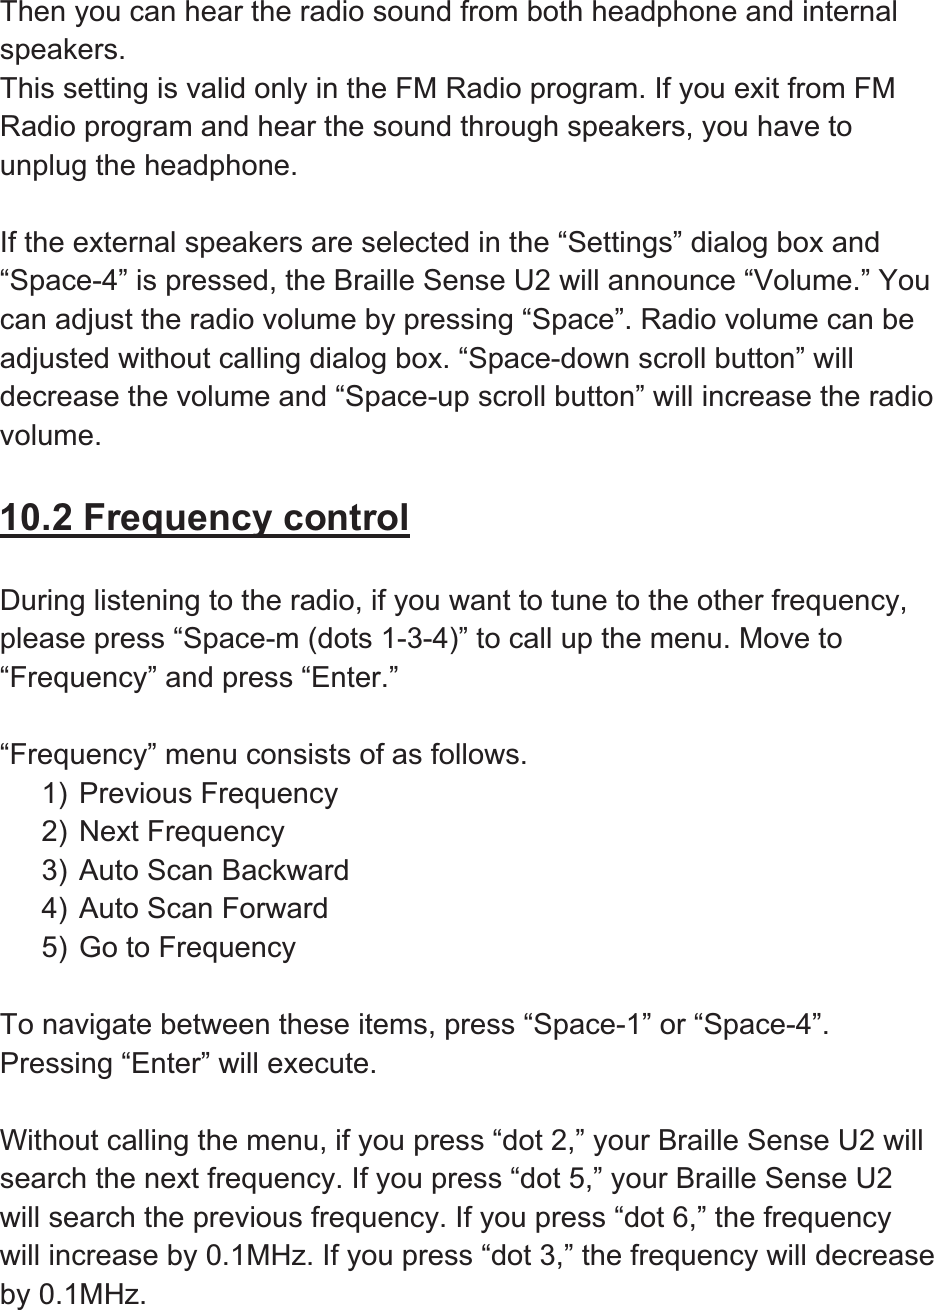 Then you can hear the radio sound from both headphone and internal speakers.This setting is valid only in the FM Radio program. If you exit from FM Radio program and hear the sound through speakers, you have to unplug the headphone. If the external speakers are selected in the “Settings” dialog box and “Space-4” is pressed, the Braille Sense U2 will announce “Volume.” You can adjust the radio volume by pressing “Space”. Radio volume can be adjusted without calling dialog box. “Space-down scroll button” will decrease the volume and “Space-up scroll button” will increase the radio volume.10.2 Frequency controlDuring listening to the radio, if you want to tune to the other frequency, please press “Space-m (dots 1-3-4)” to call up the menu. Move to “Frequency” and press “Enter.”   “Frequency” menu consists of as follows.   1) Previous Frequency 2) Next Frequency 3) Auto Scan Backward 4) Auto Scan Forward 5) Go to Frequency To navigate between these items, press “Space-1” or “Space-4”. Pressing “Enter” will execute.   Without calling the menu, if you press “dot 2,” your Braille Sense U2 will search the next frequency. If you press “dot 5,” your Braille Sense U2 will search the previous frequency. If you press “dot 6,” the frequency will increase by 0.1MHz. If you press “dot 3,” the frequency will decrease by 0.1MHz. 